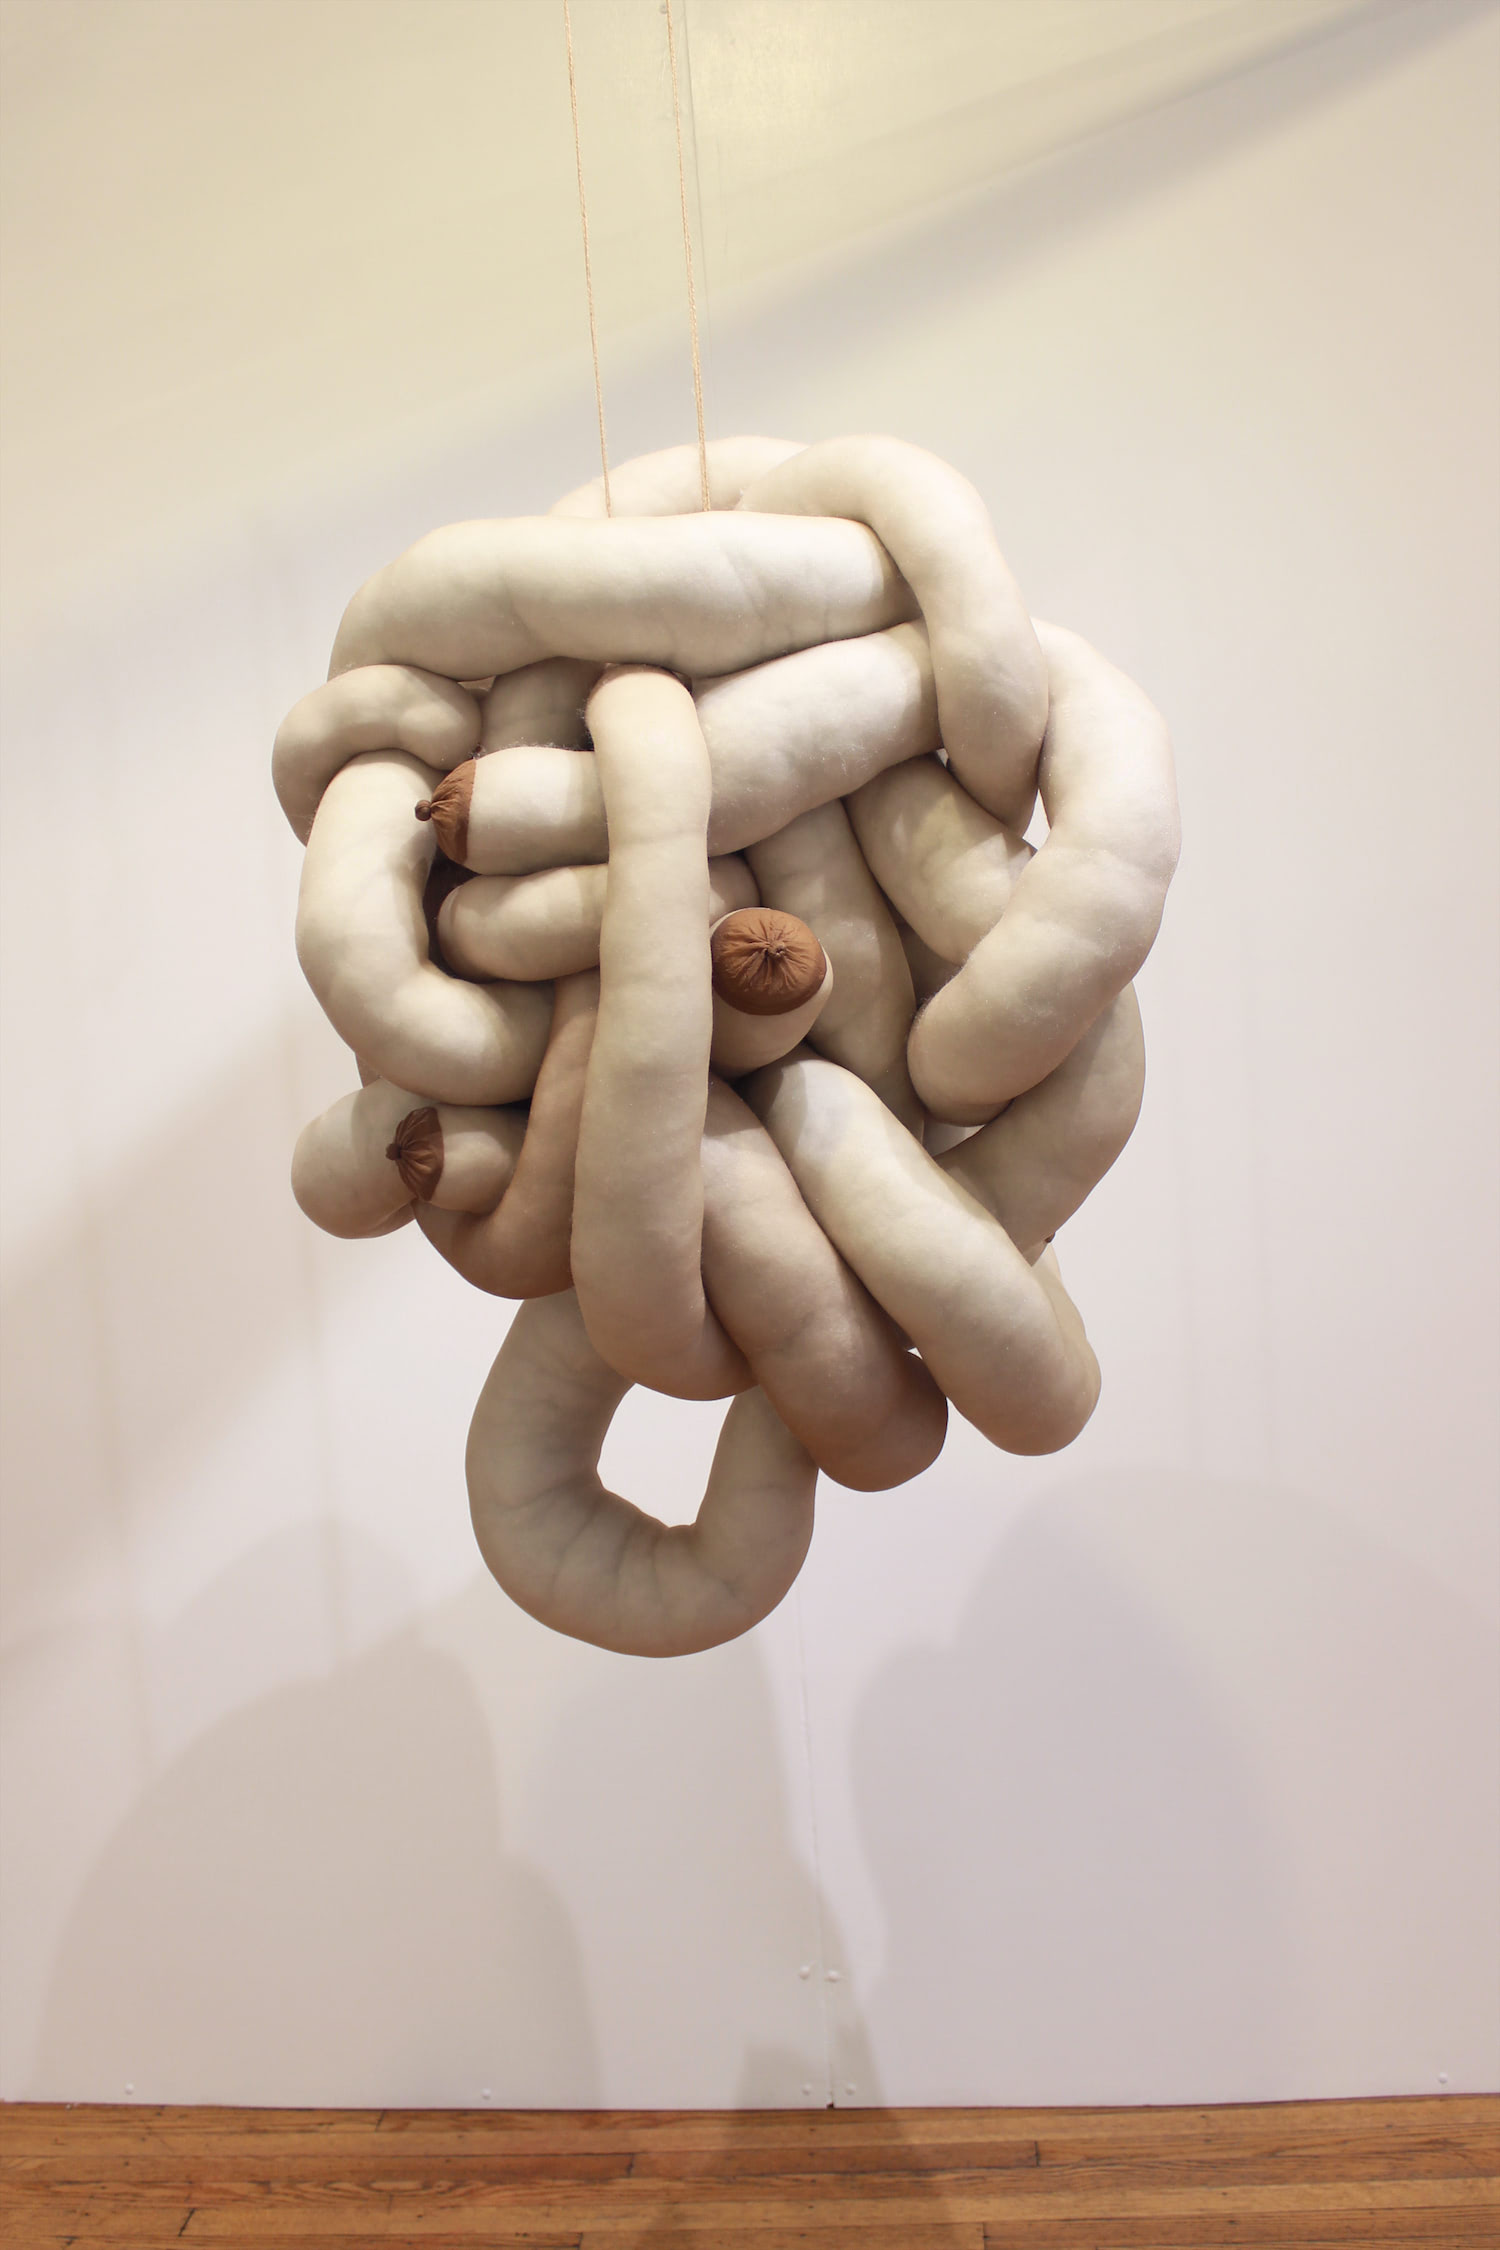 This image shows one of the hanging sculptures created from pantyhose, poly-fil, and thread. The sculpture twists in and out of itself creating a large knotted mass with nipples at the ends of the individual soft sculpture forms.